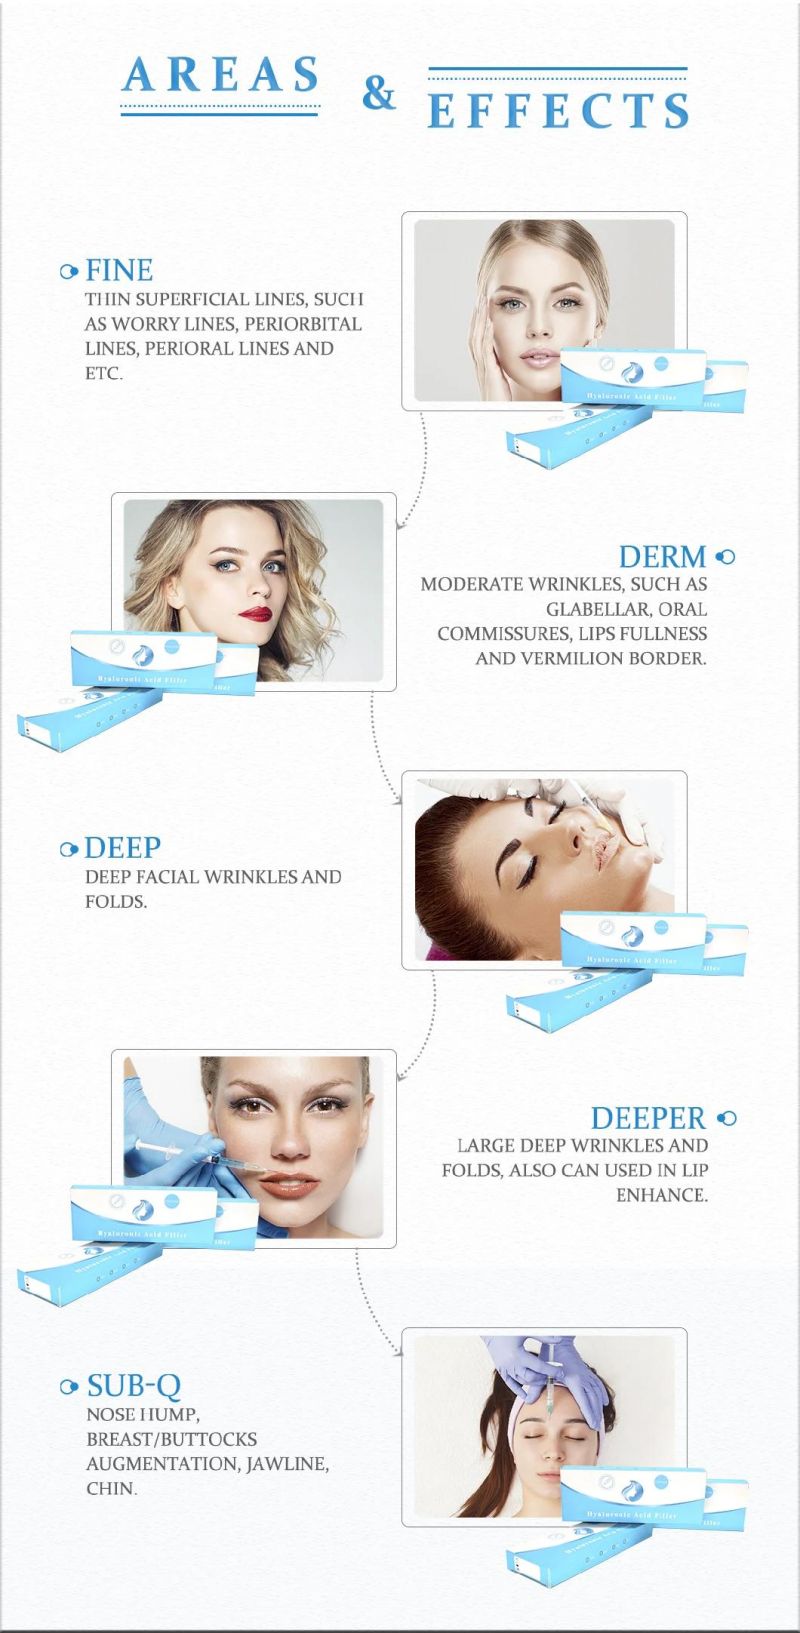 5ml Factory ODM Acido Hialuronico Inyectable Hyaluronic Acid Dermal Filler Sodium Hyaluronate Breast Butts Lips Facial Anti Aging Filler